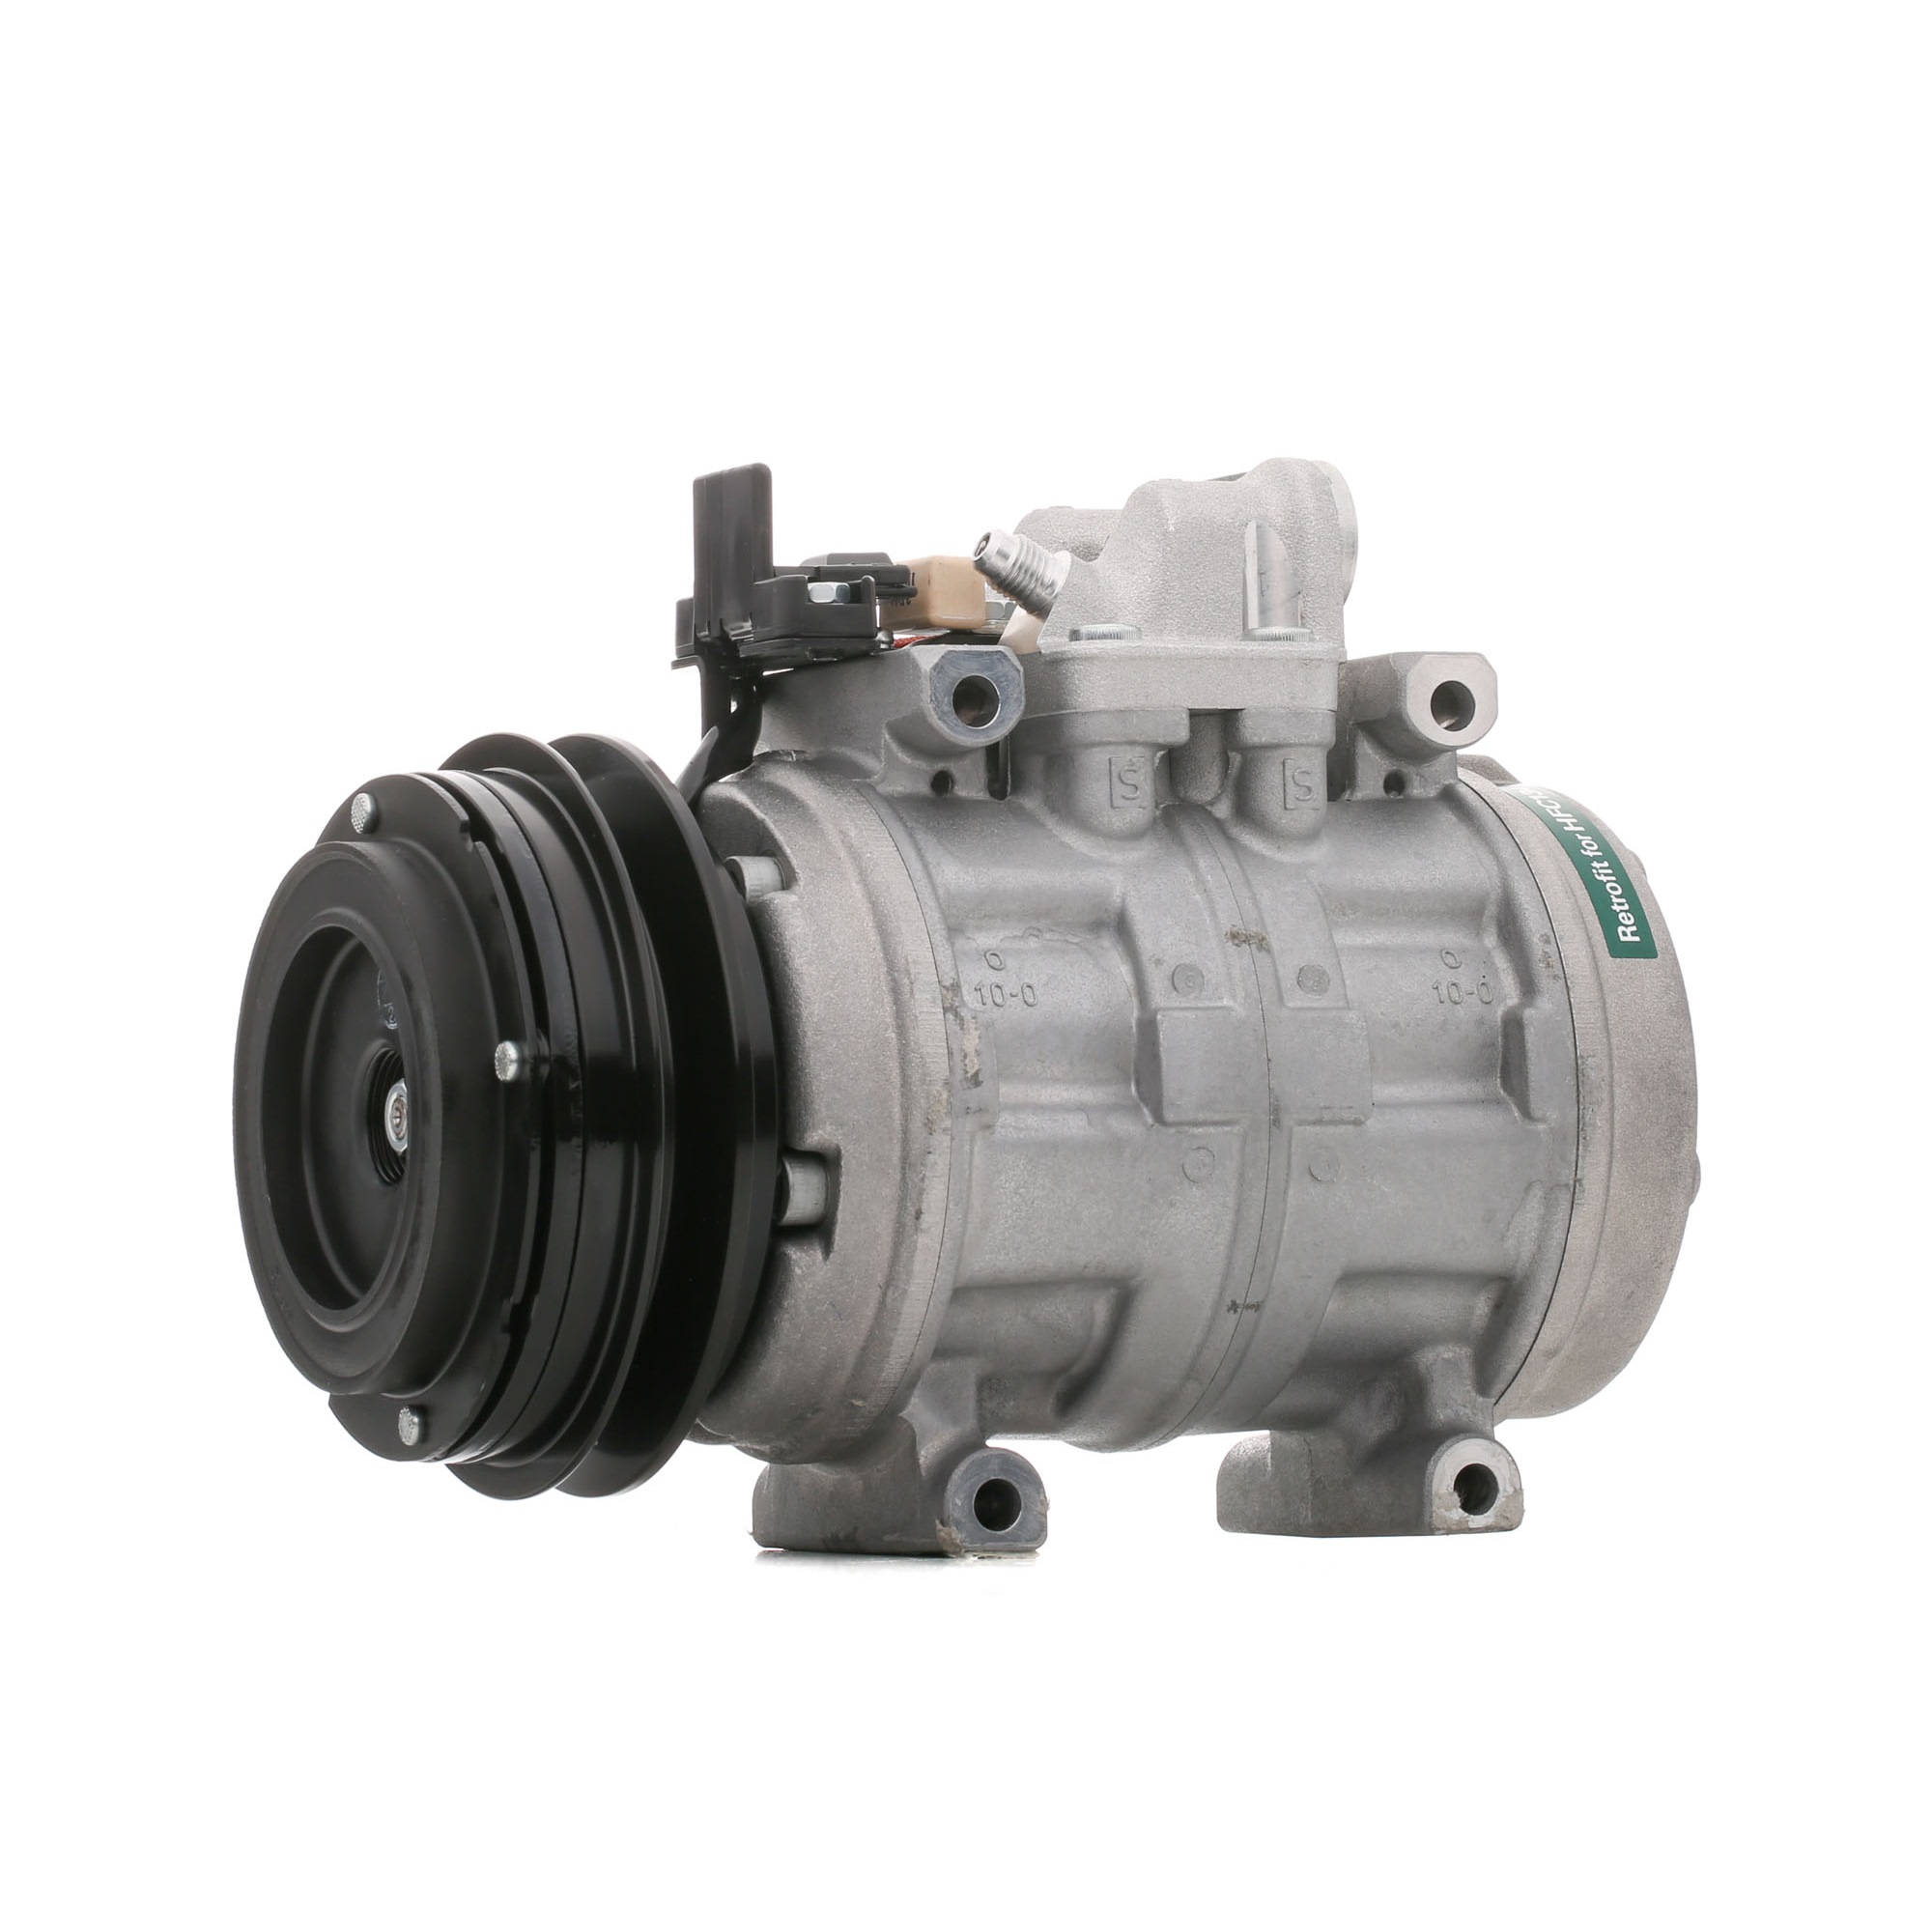 DENSO DCP17003 Air conditioning compressor 10P17C, 12V, PAG 46, R 134a, with magnetic clutch